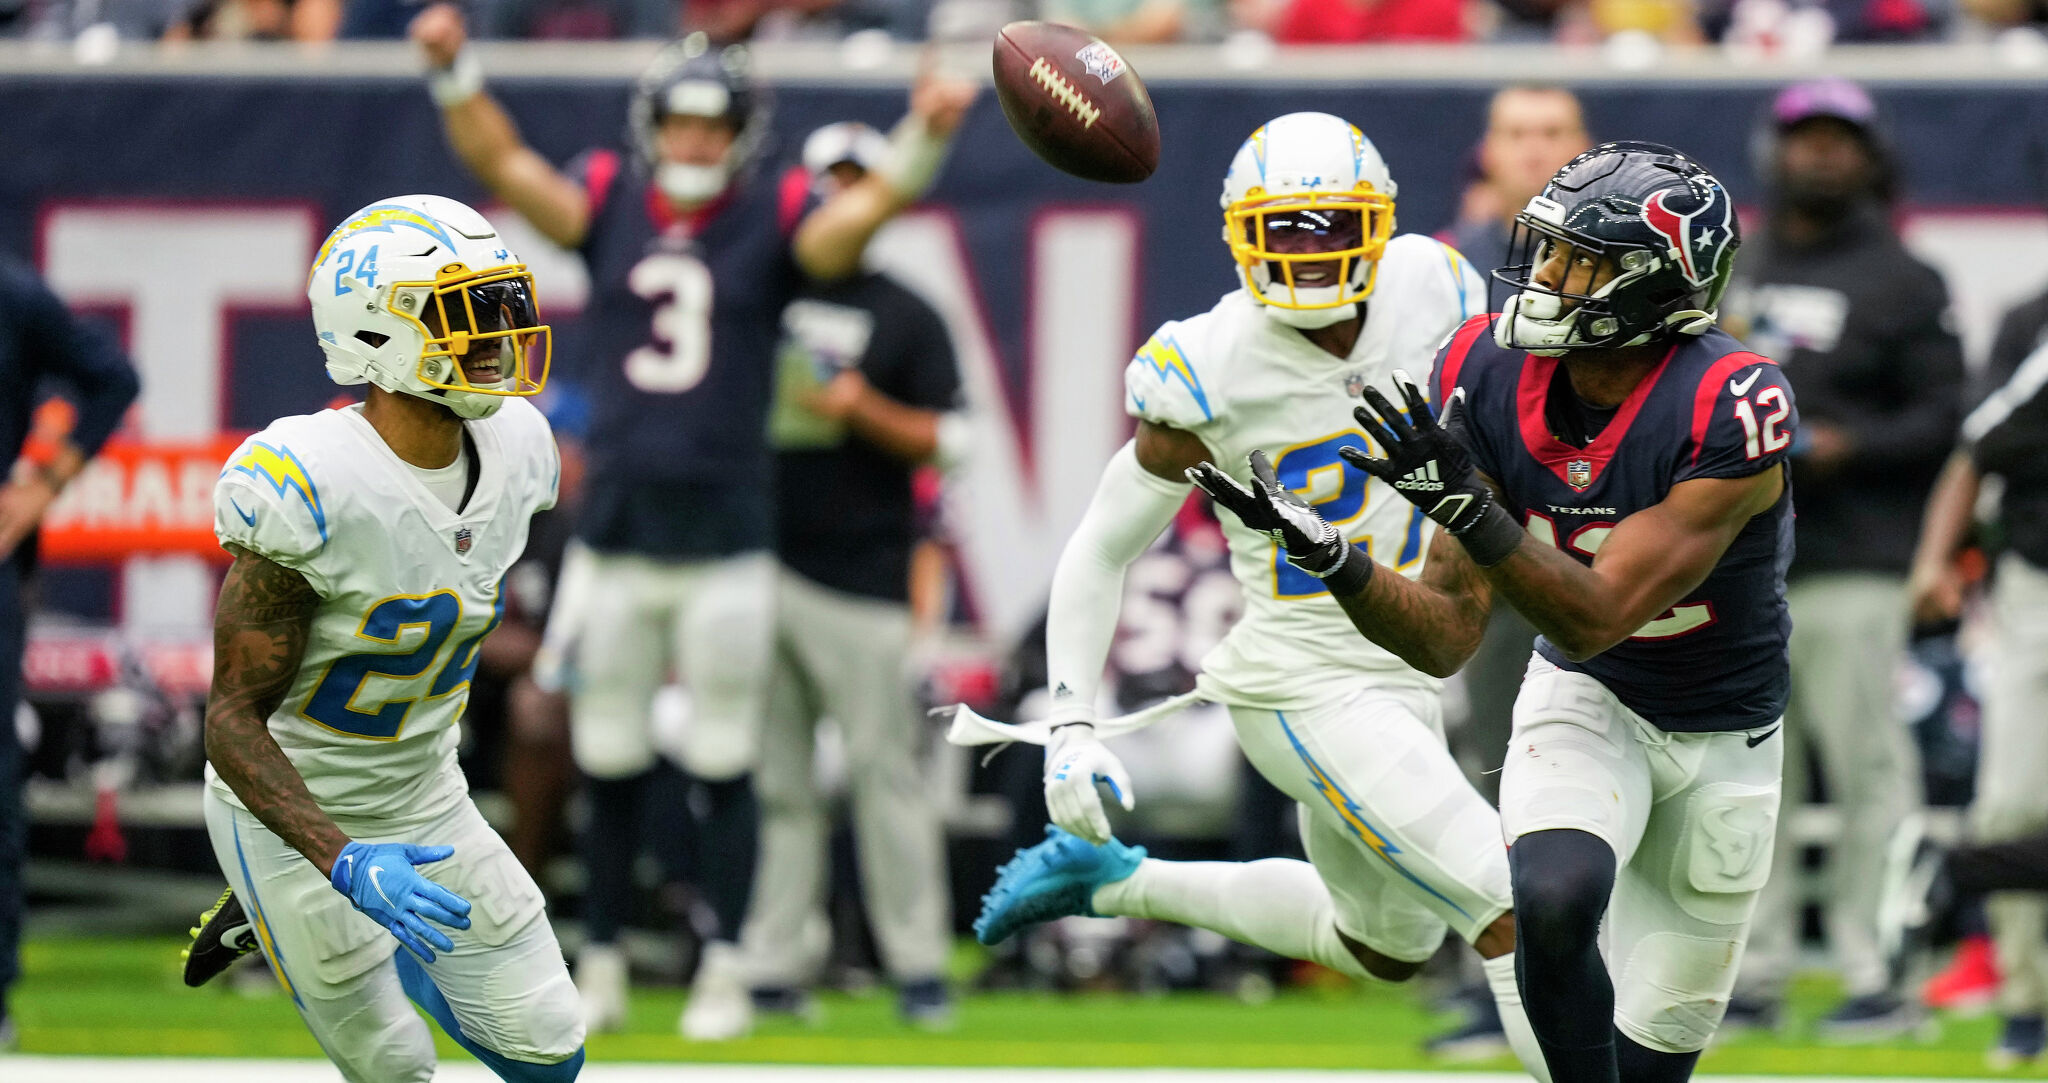 Chargers' Nasir Adderley, 25, retires after 4 seasons to